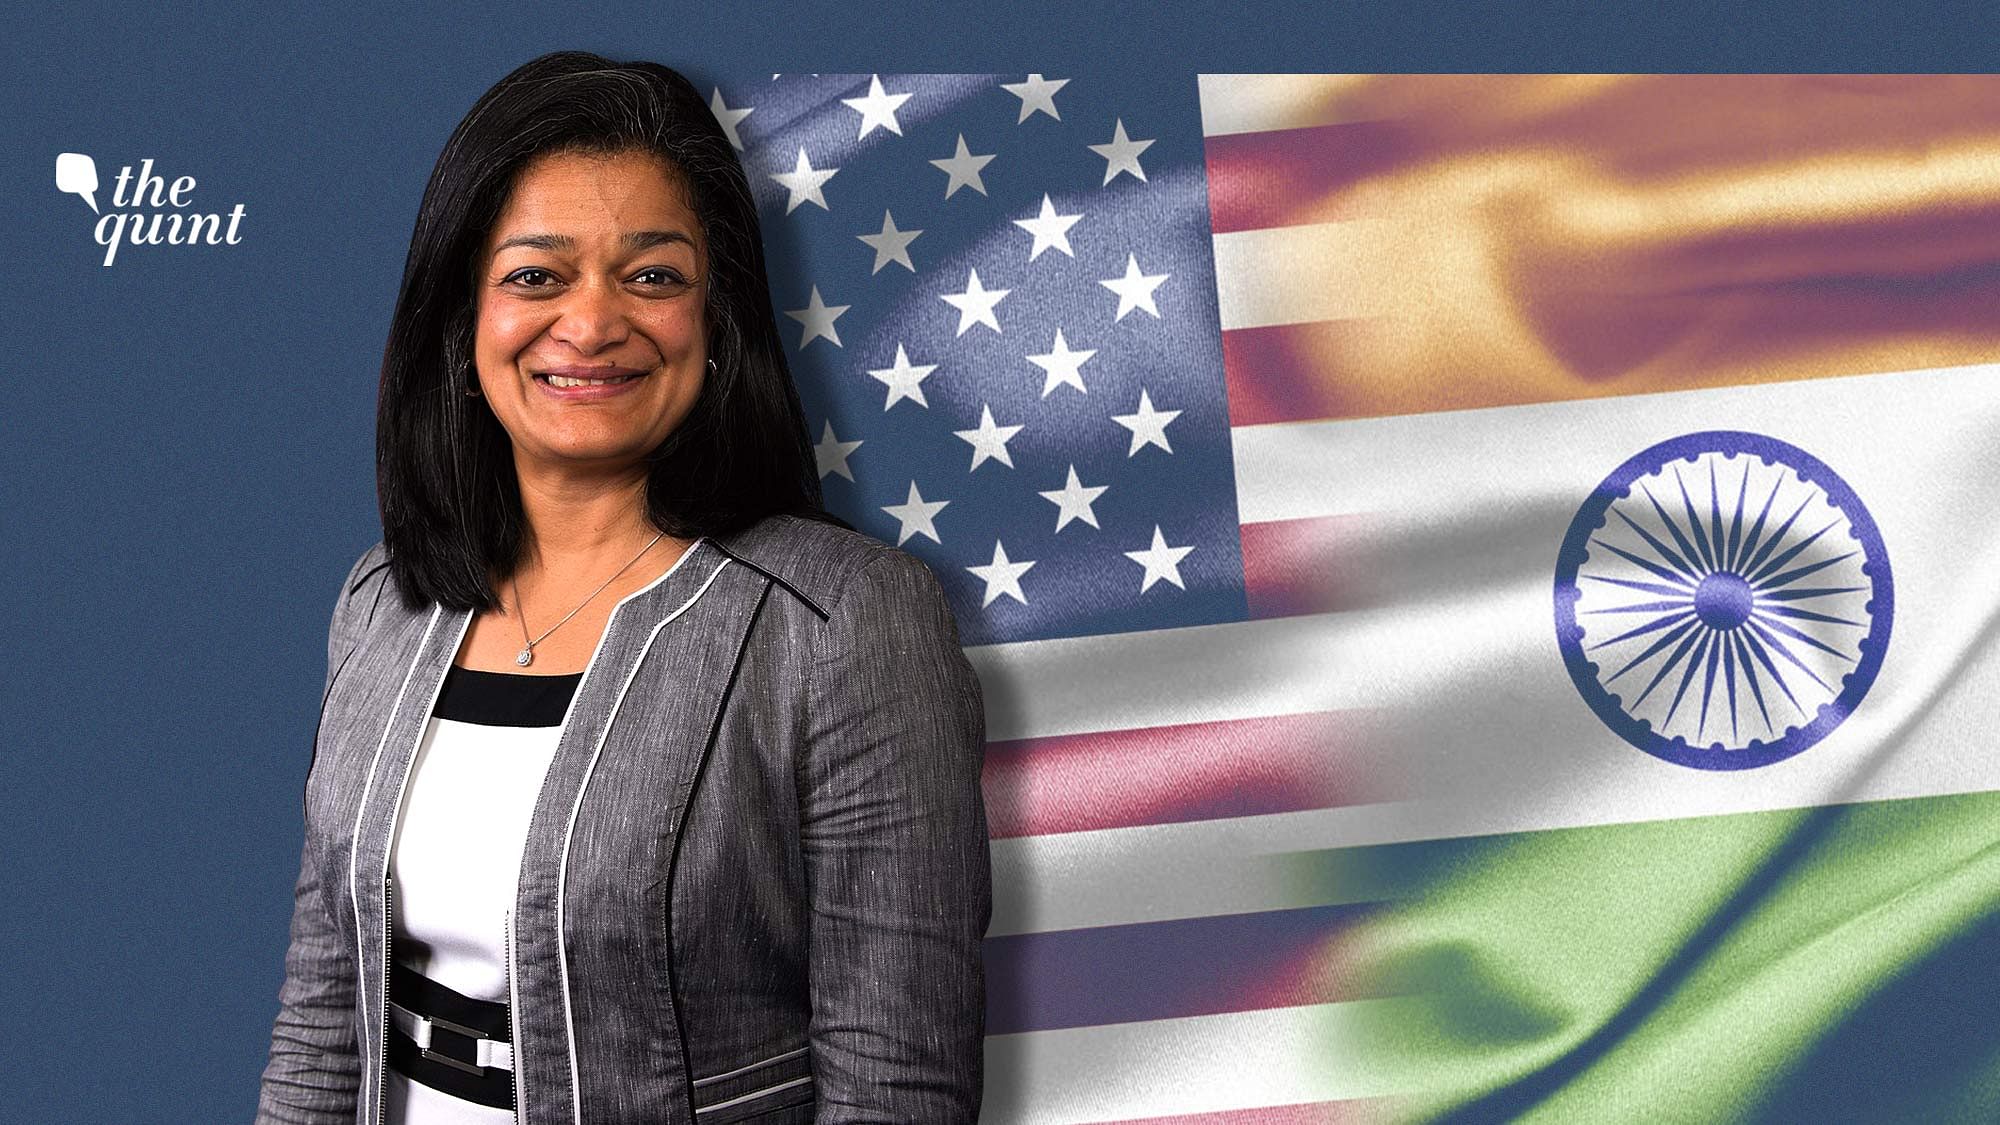 “The power is in our hands; and when we exercise that power, there is nothing that can stop us on the road to justice,” Jayapal stated.